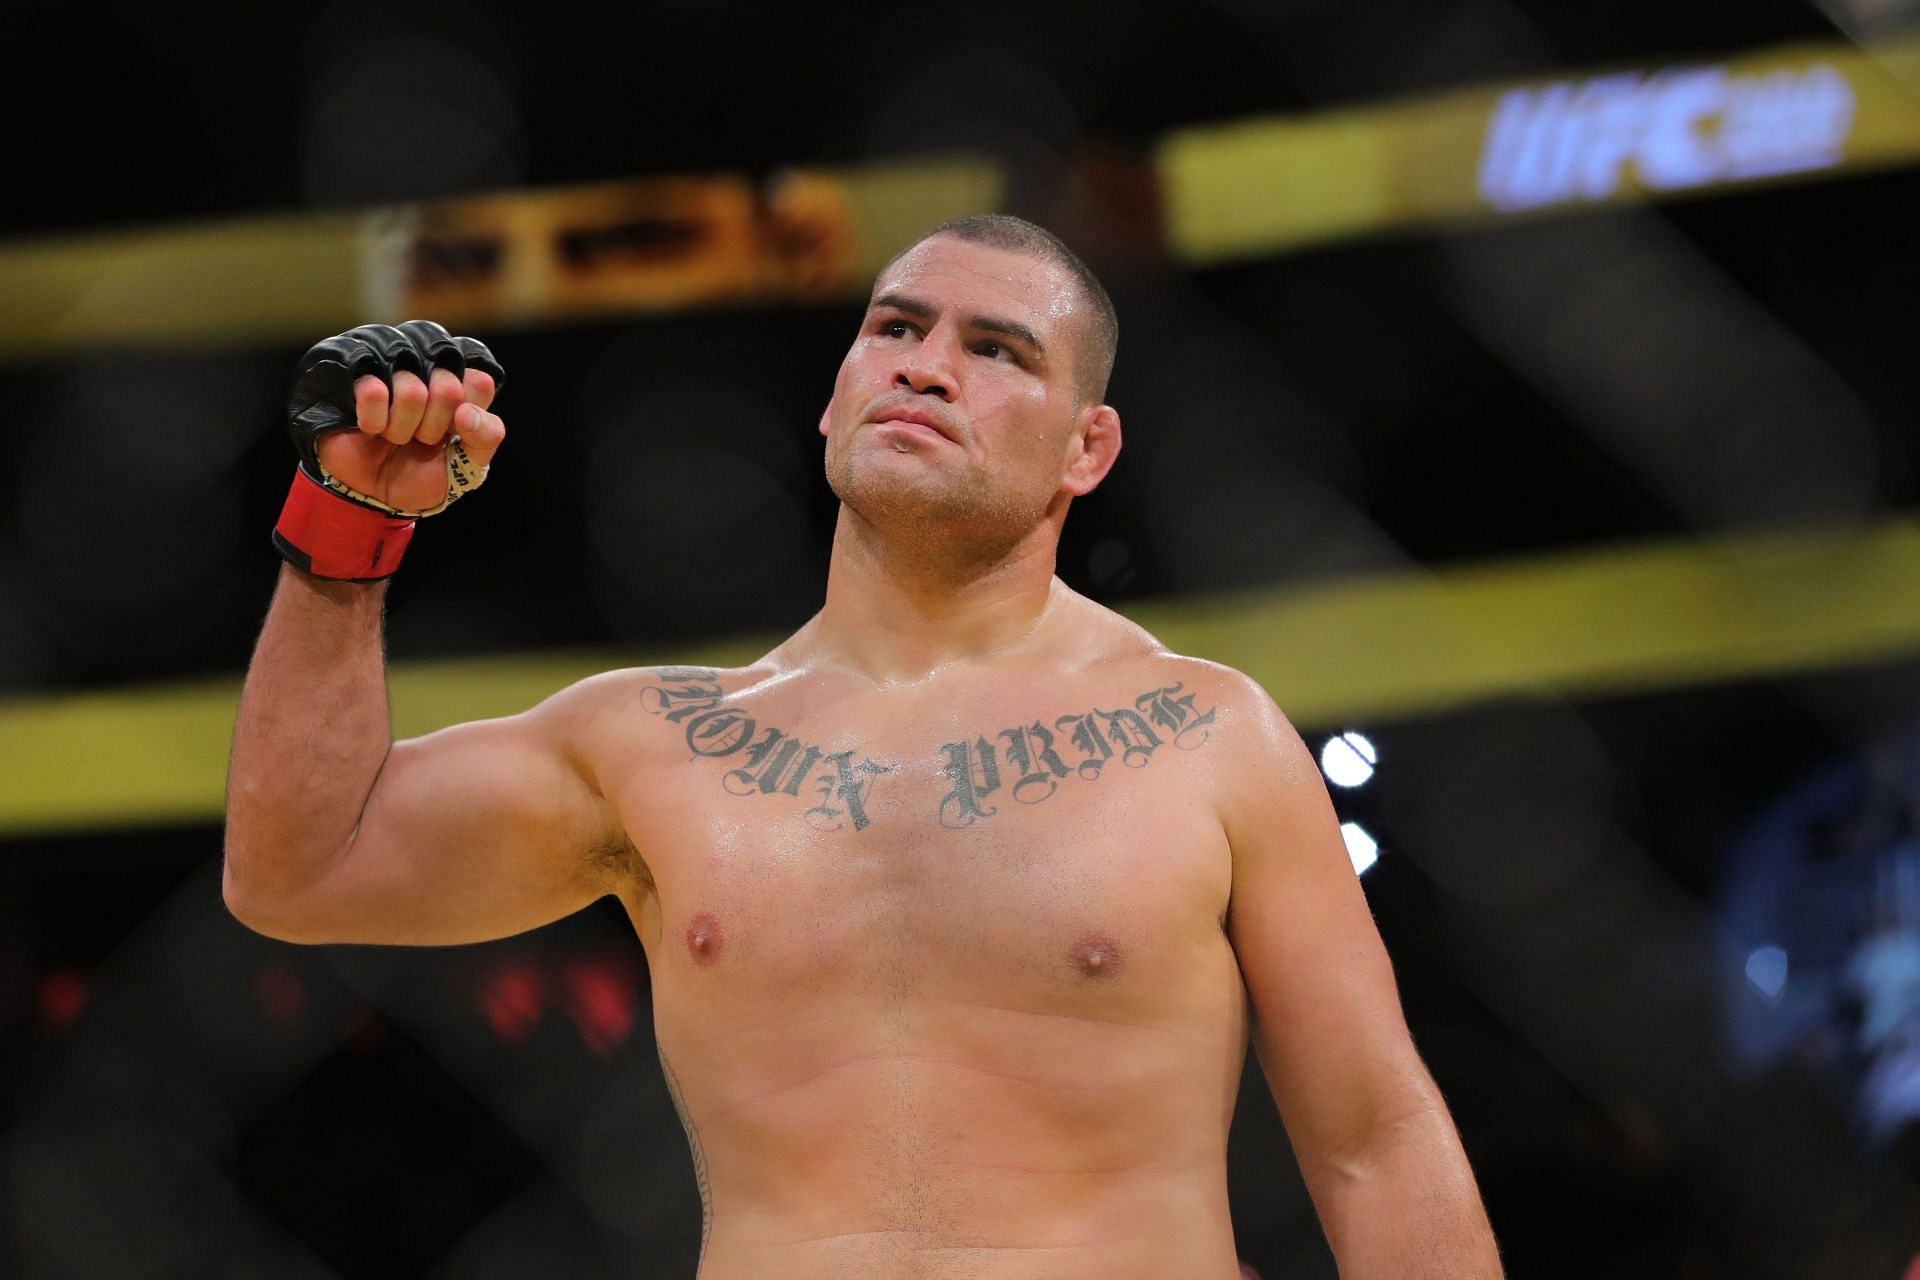 Despite a lack of experience, Cain Velasquez garnered a wild amount of hype for his octagon debut